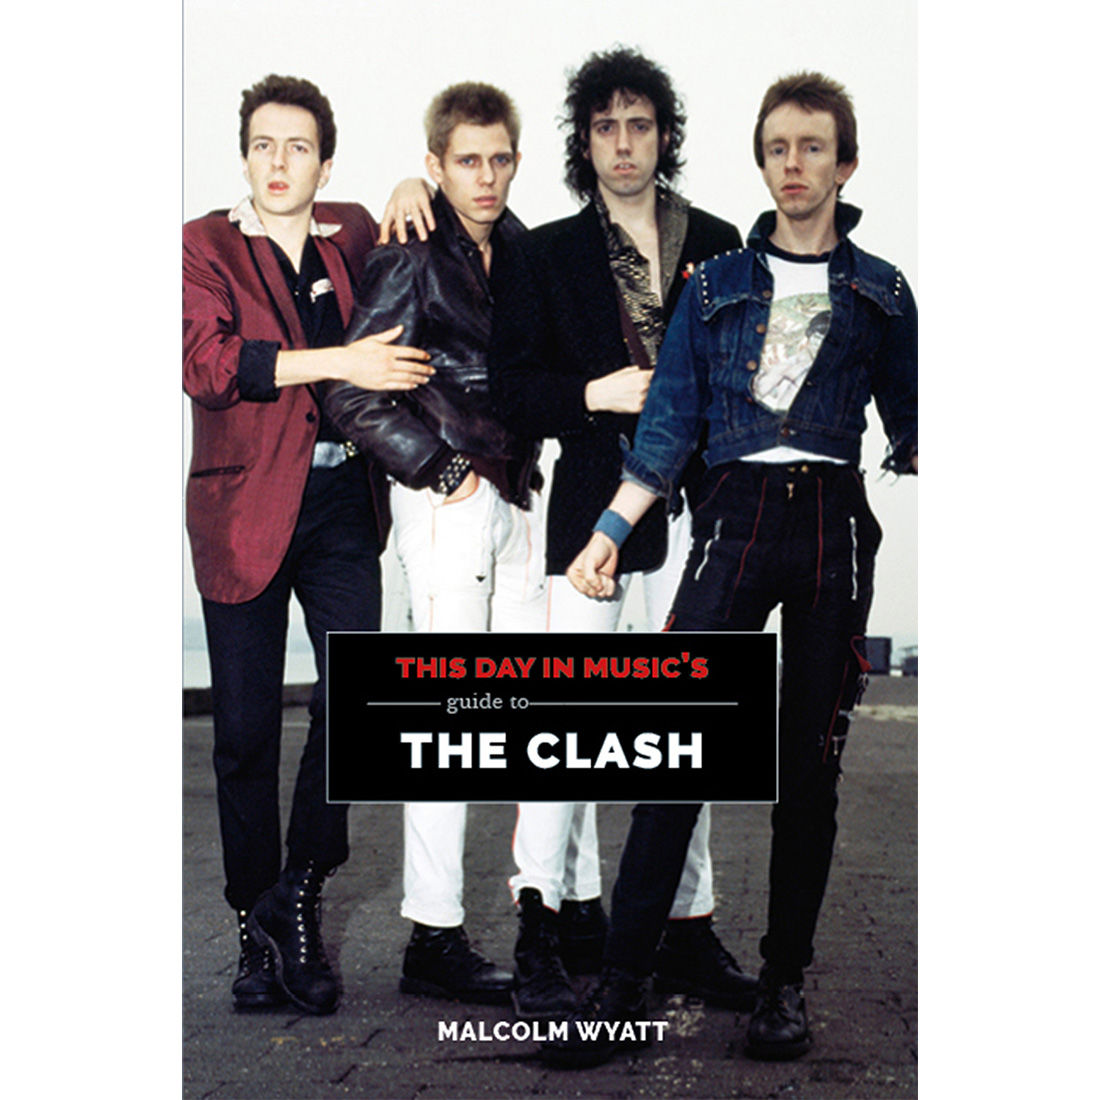 This Day In Music - This Day in Music Guide to The Clash: Paperback Edition Book